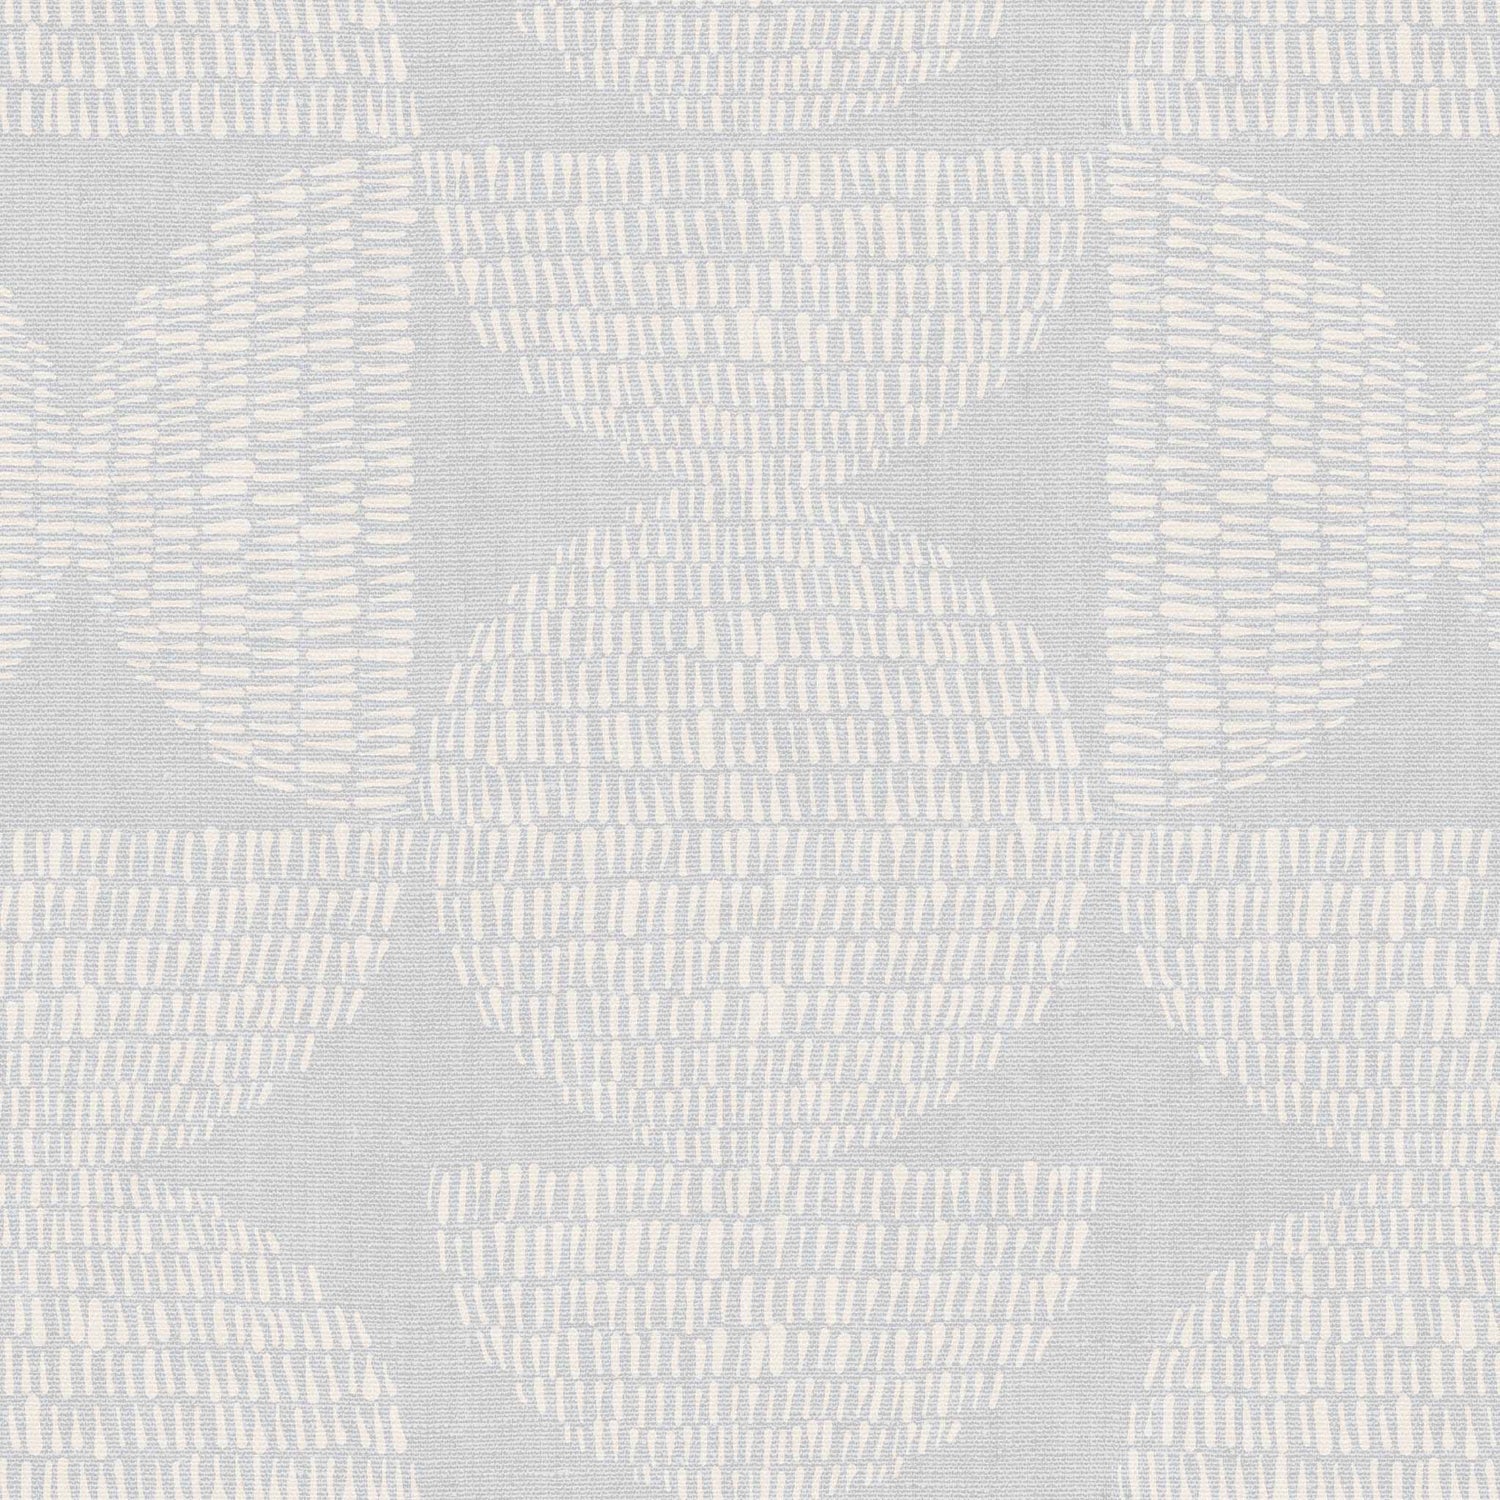 Go crazy with circles! Get yourself these stylish Half Circle Blocks Wallpapers for a unique wall decor solution. With its pale blue design, these geometric wallpapers will easily liven up any room, making it look modern and chic.